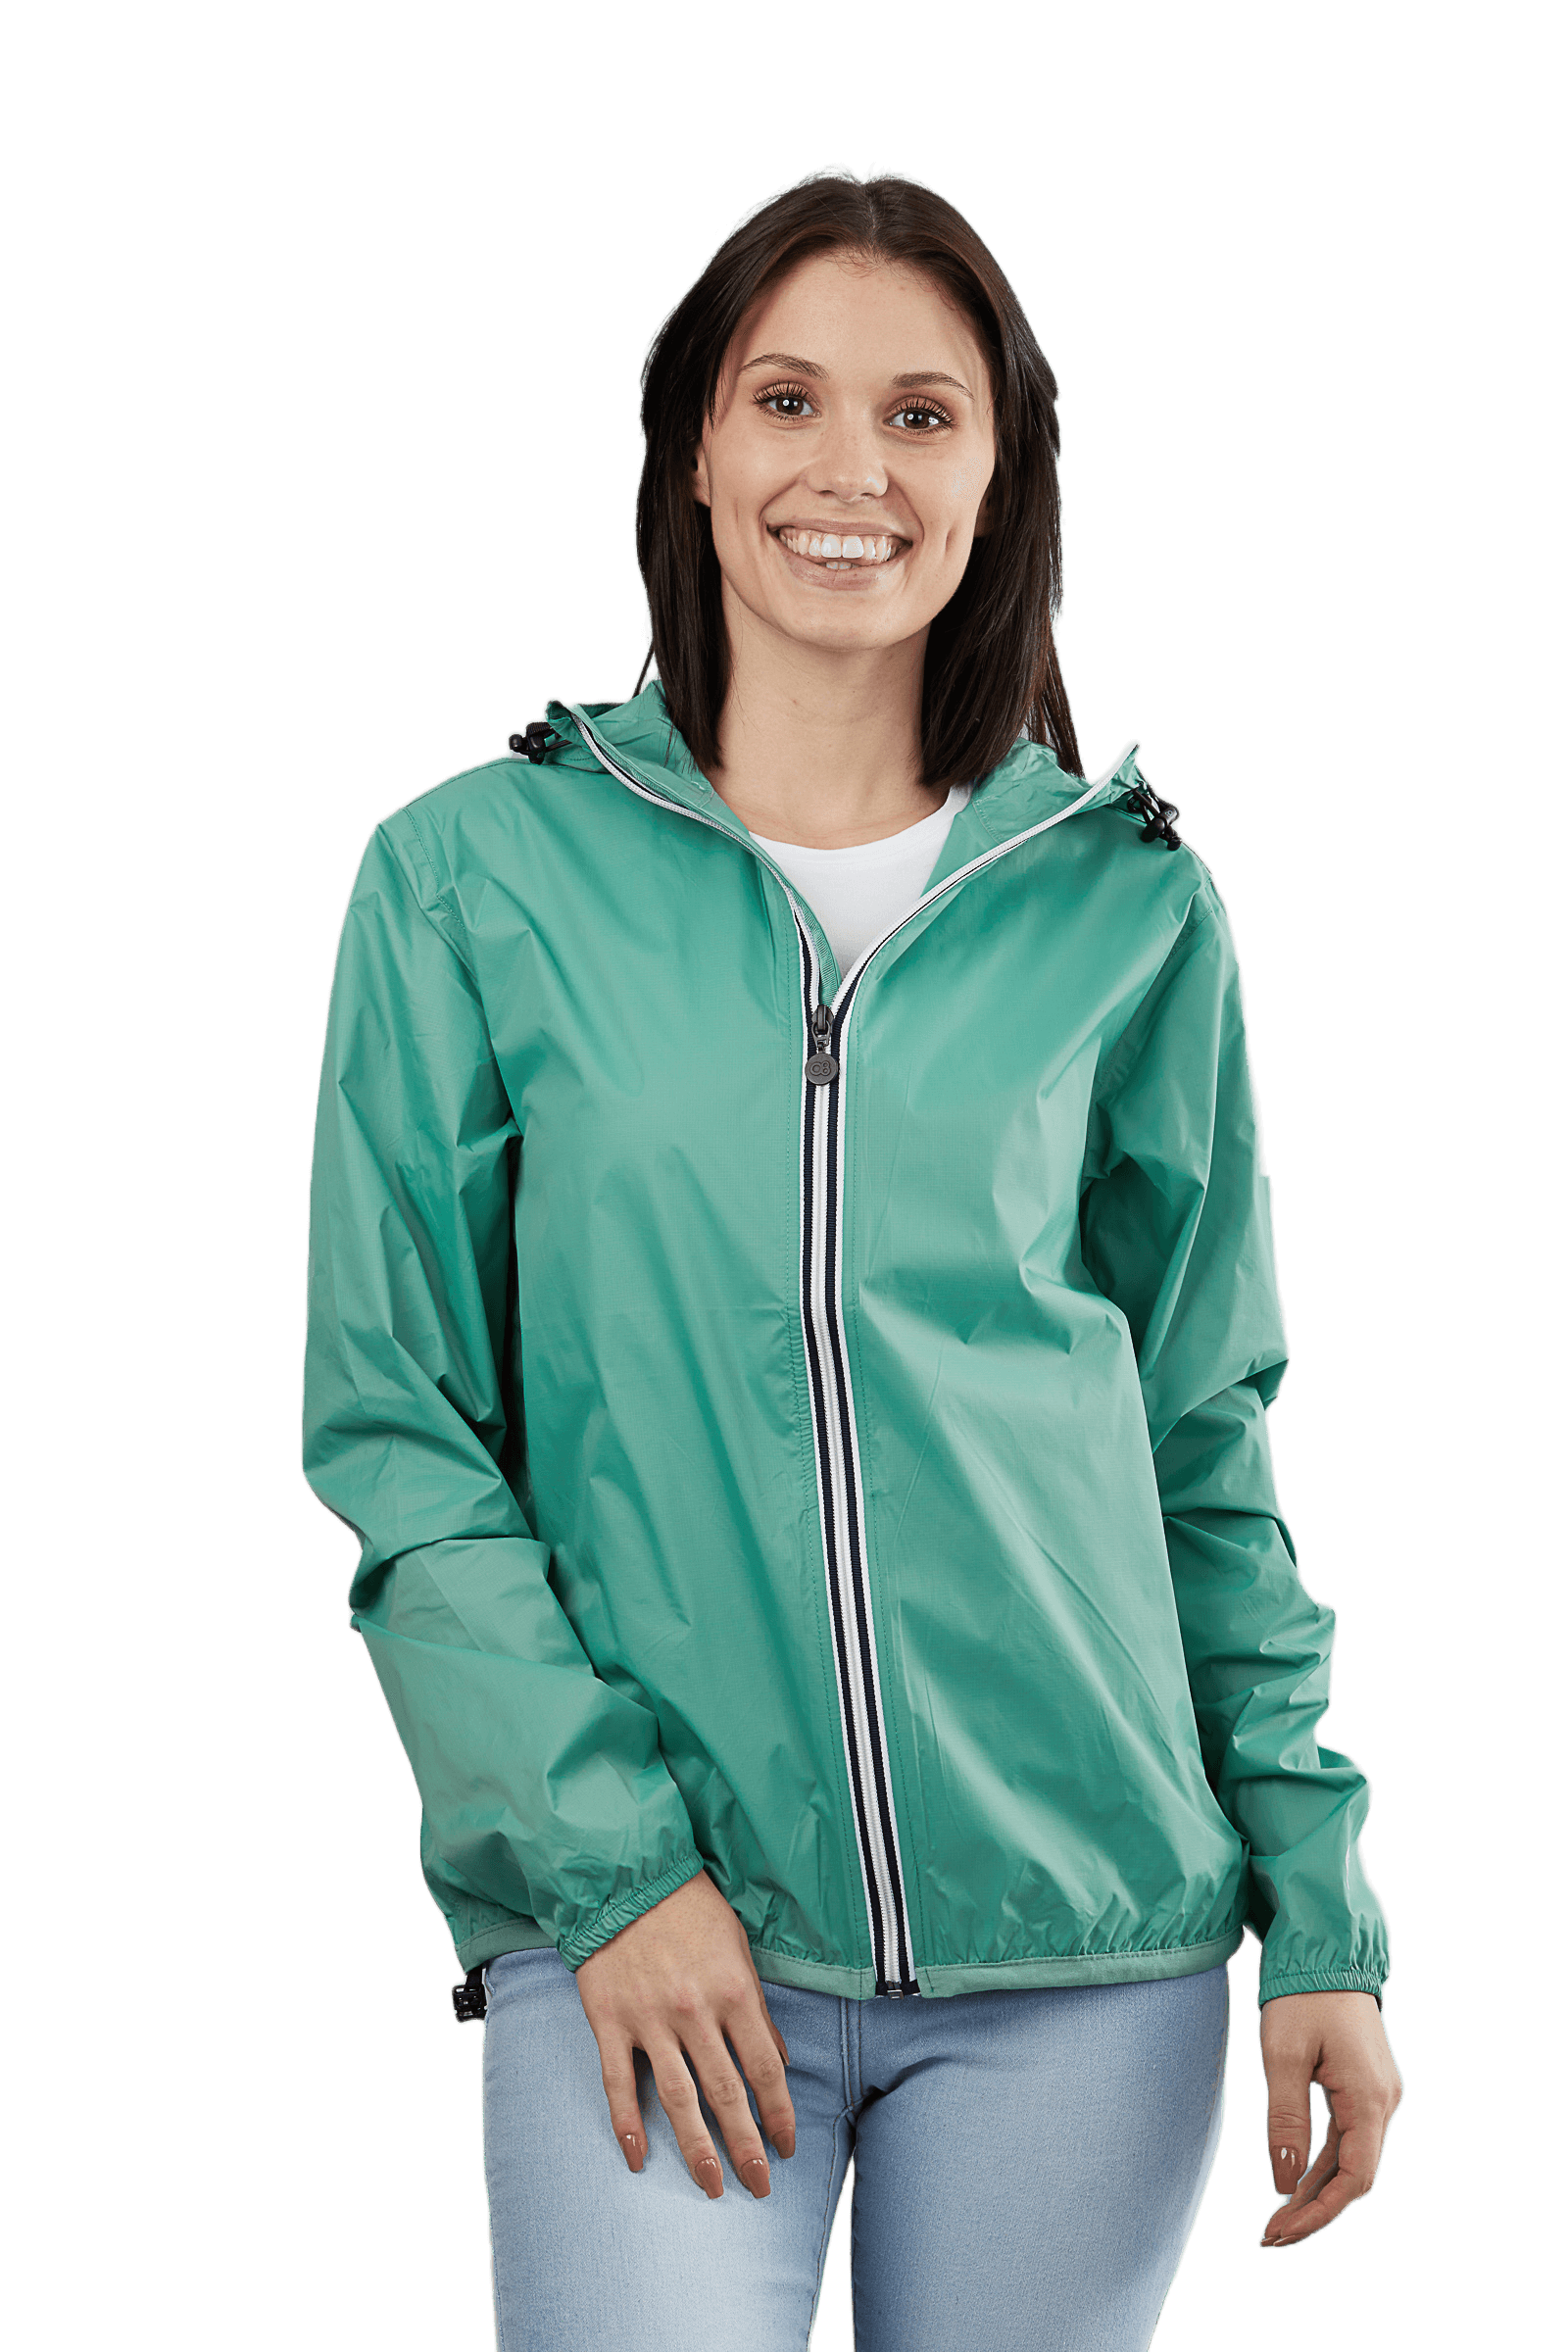 Built for a breeze. Go from warm-up to cool down in our new zip-up jacket  that won't slow you down. Our Organza Windbreaker is as…